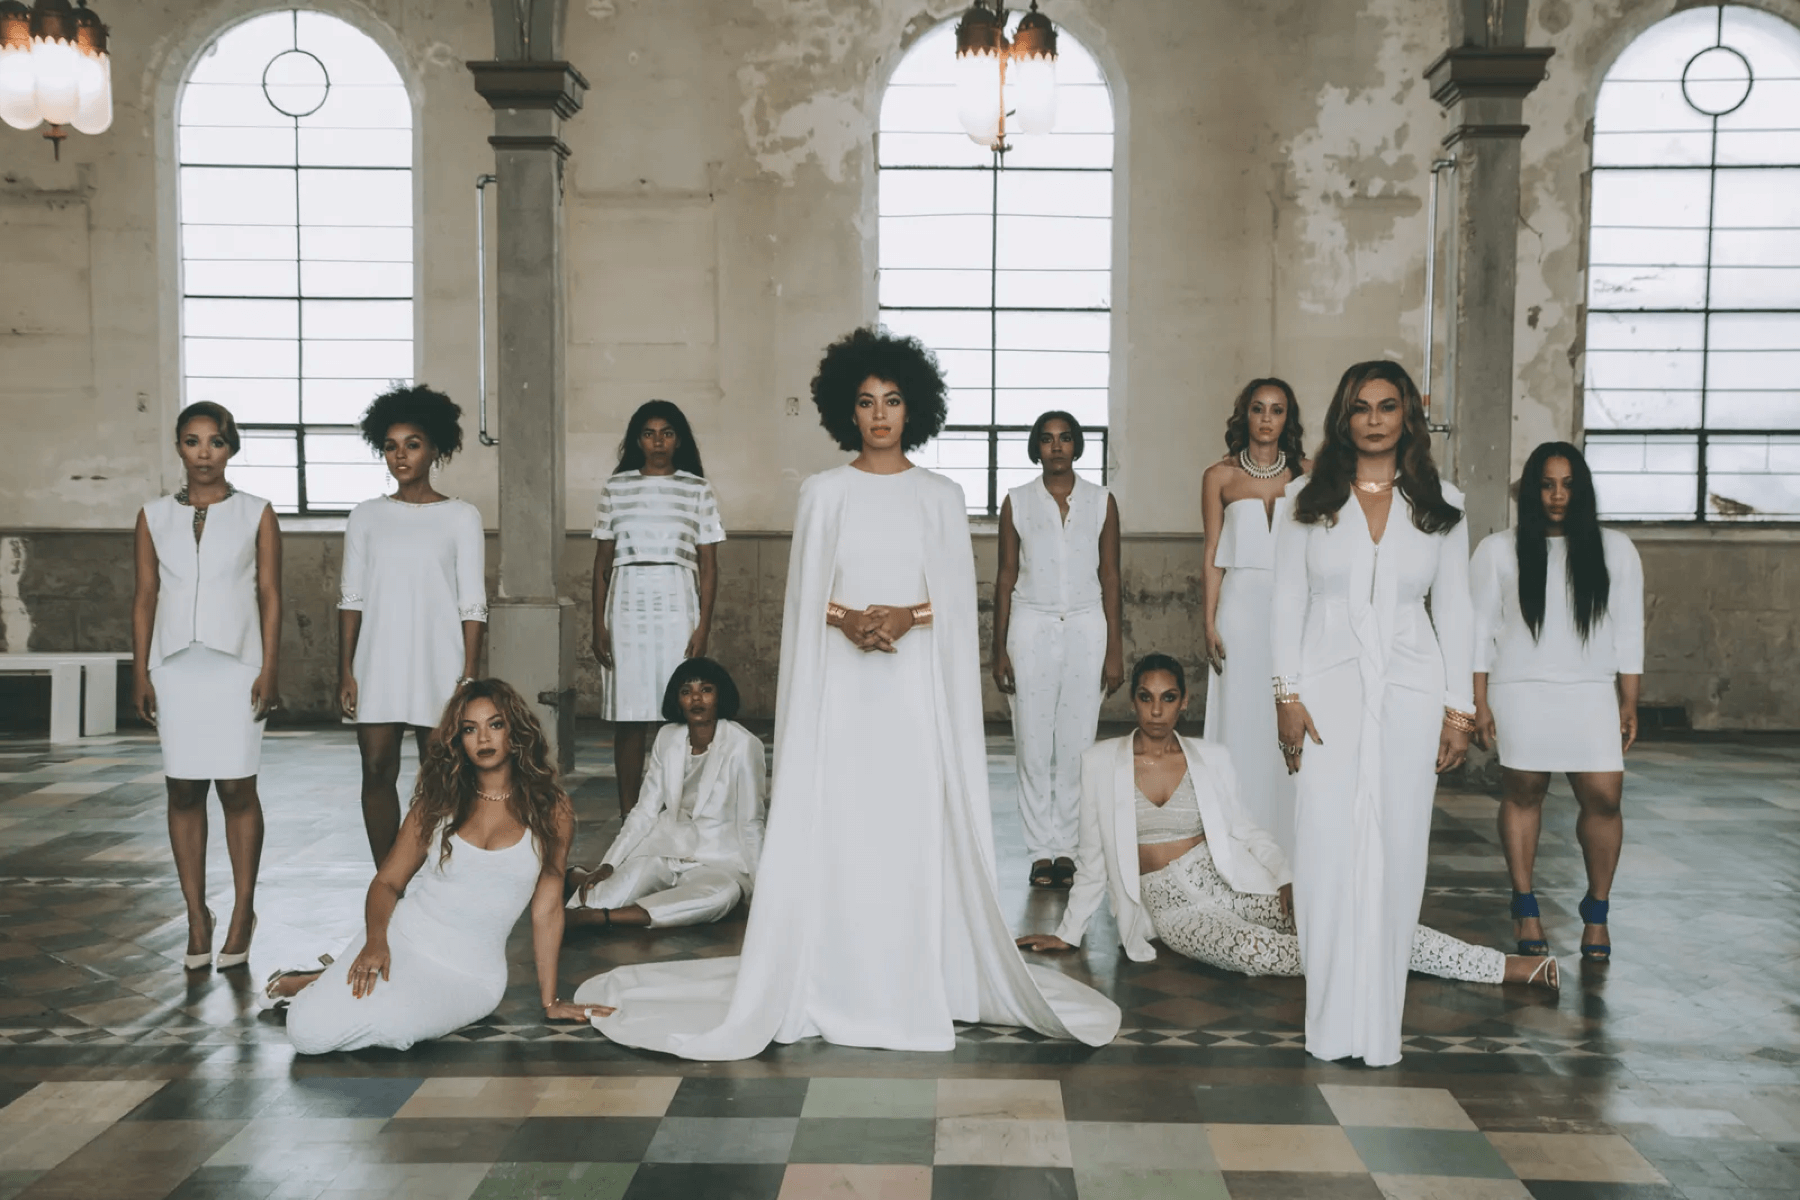 Solange Knowles stands in a bare room with her wedding party. They are all wearing white.